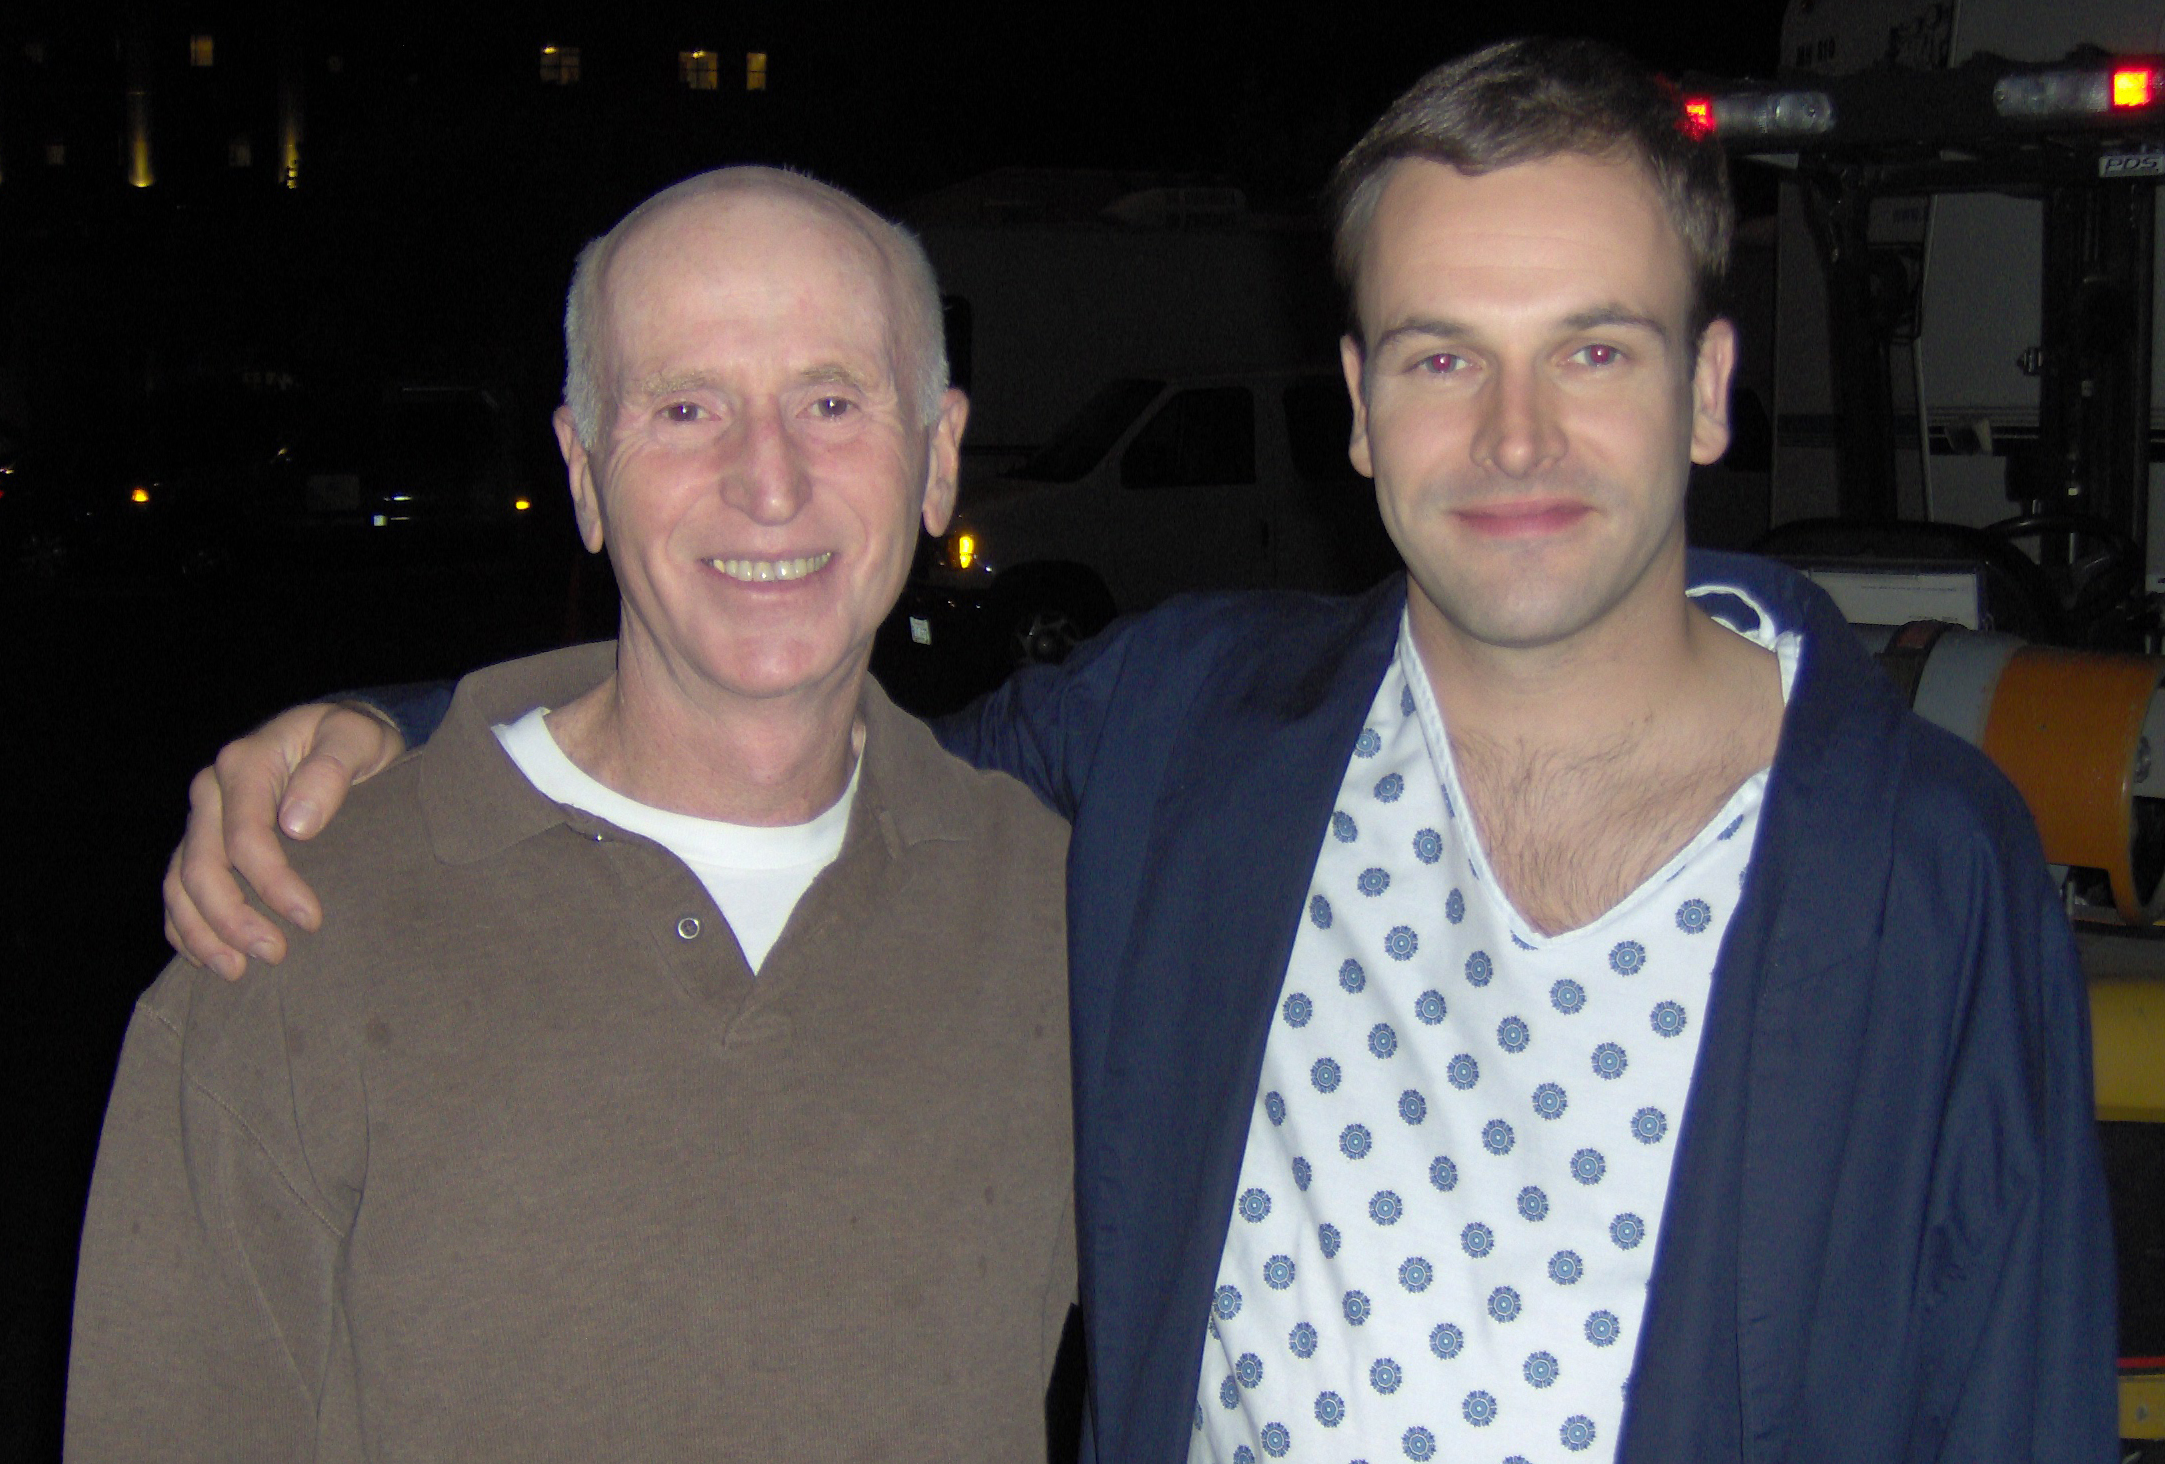 Me with Johnny Lee Miller on Eli Stone